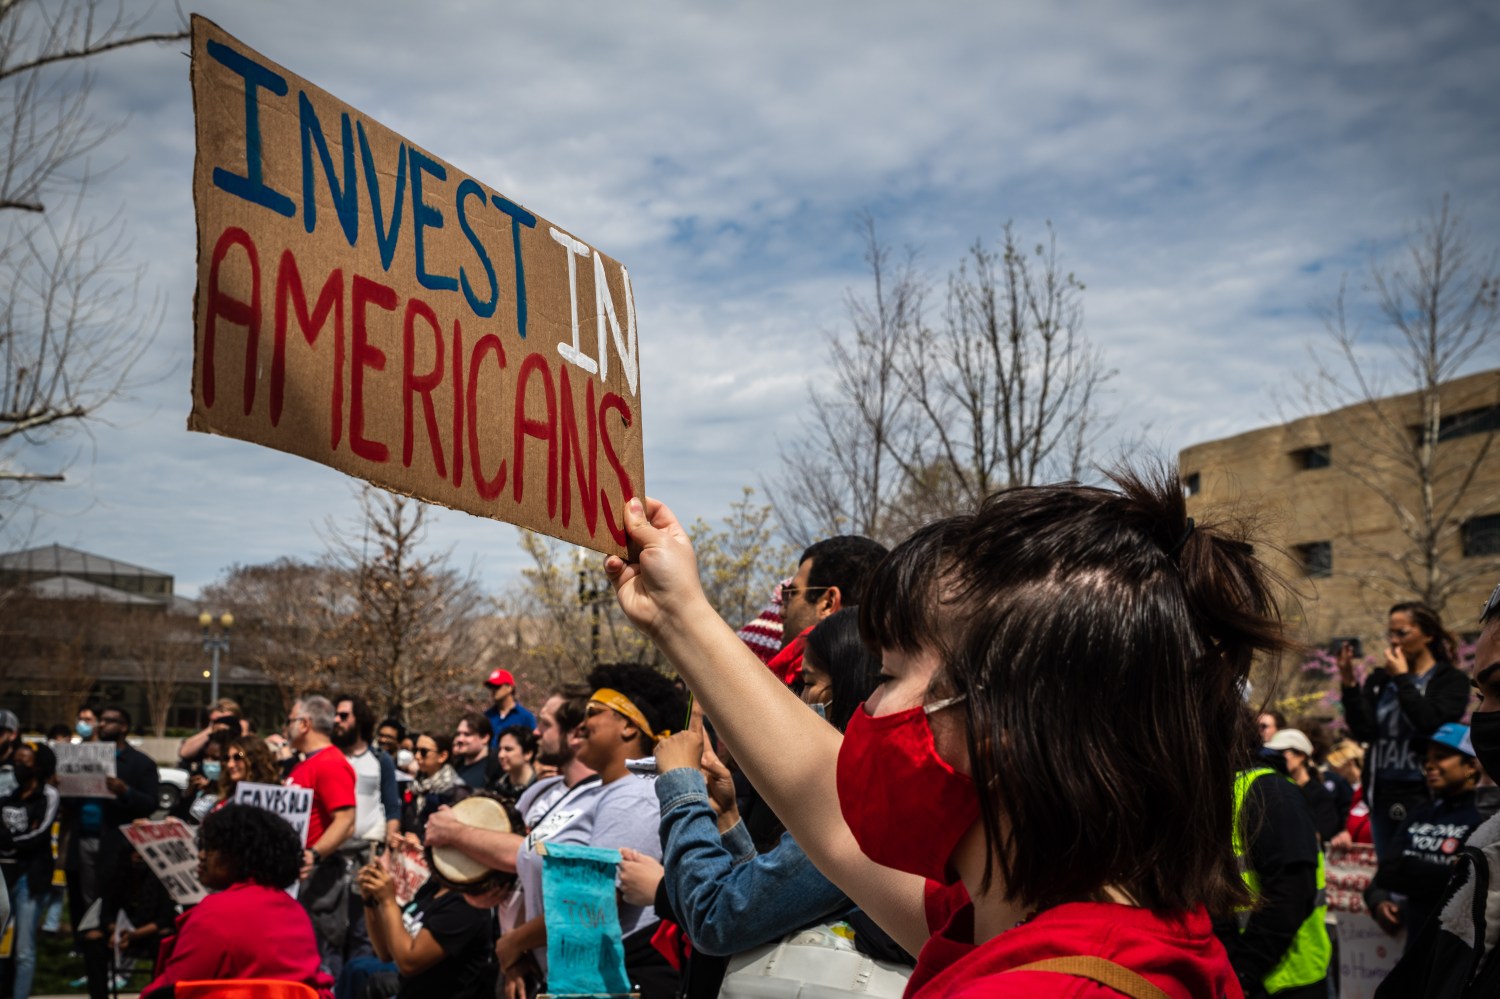 People attend a rally against student debt outside the U.S. Department of Education in Washington, D.C. on April 4, 2022. Members of the Debt Collective, which describes itself as a borrowers' union, called for President Joe Biden to abolish all student loan debt by executive order, with a pandemic-era pause on payments set to end in May. (Photo by Alejandro Alvarez/Sipa USA)No Use Germany.